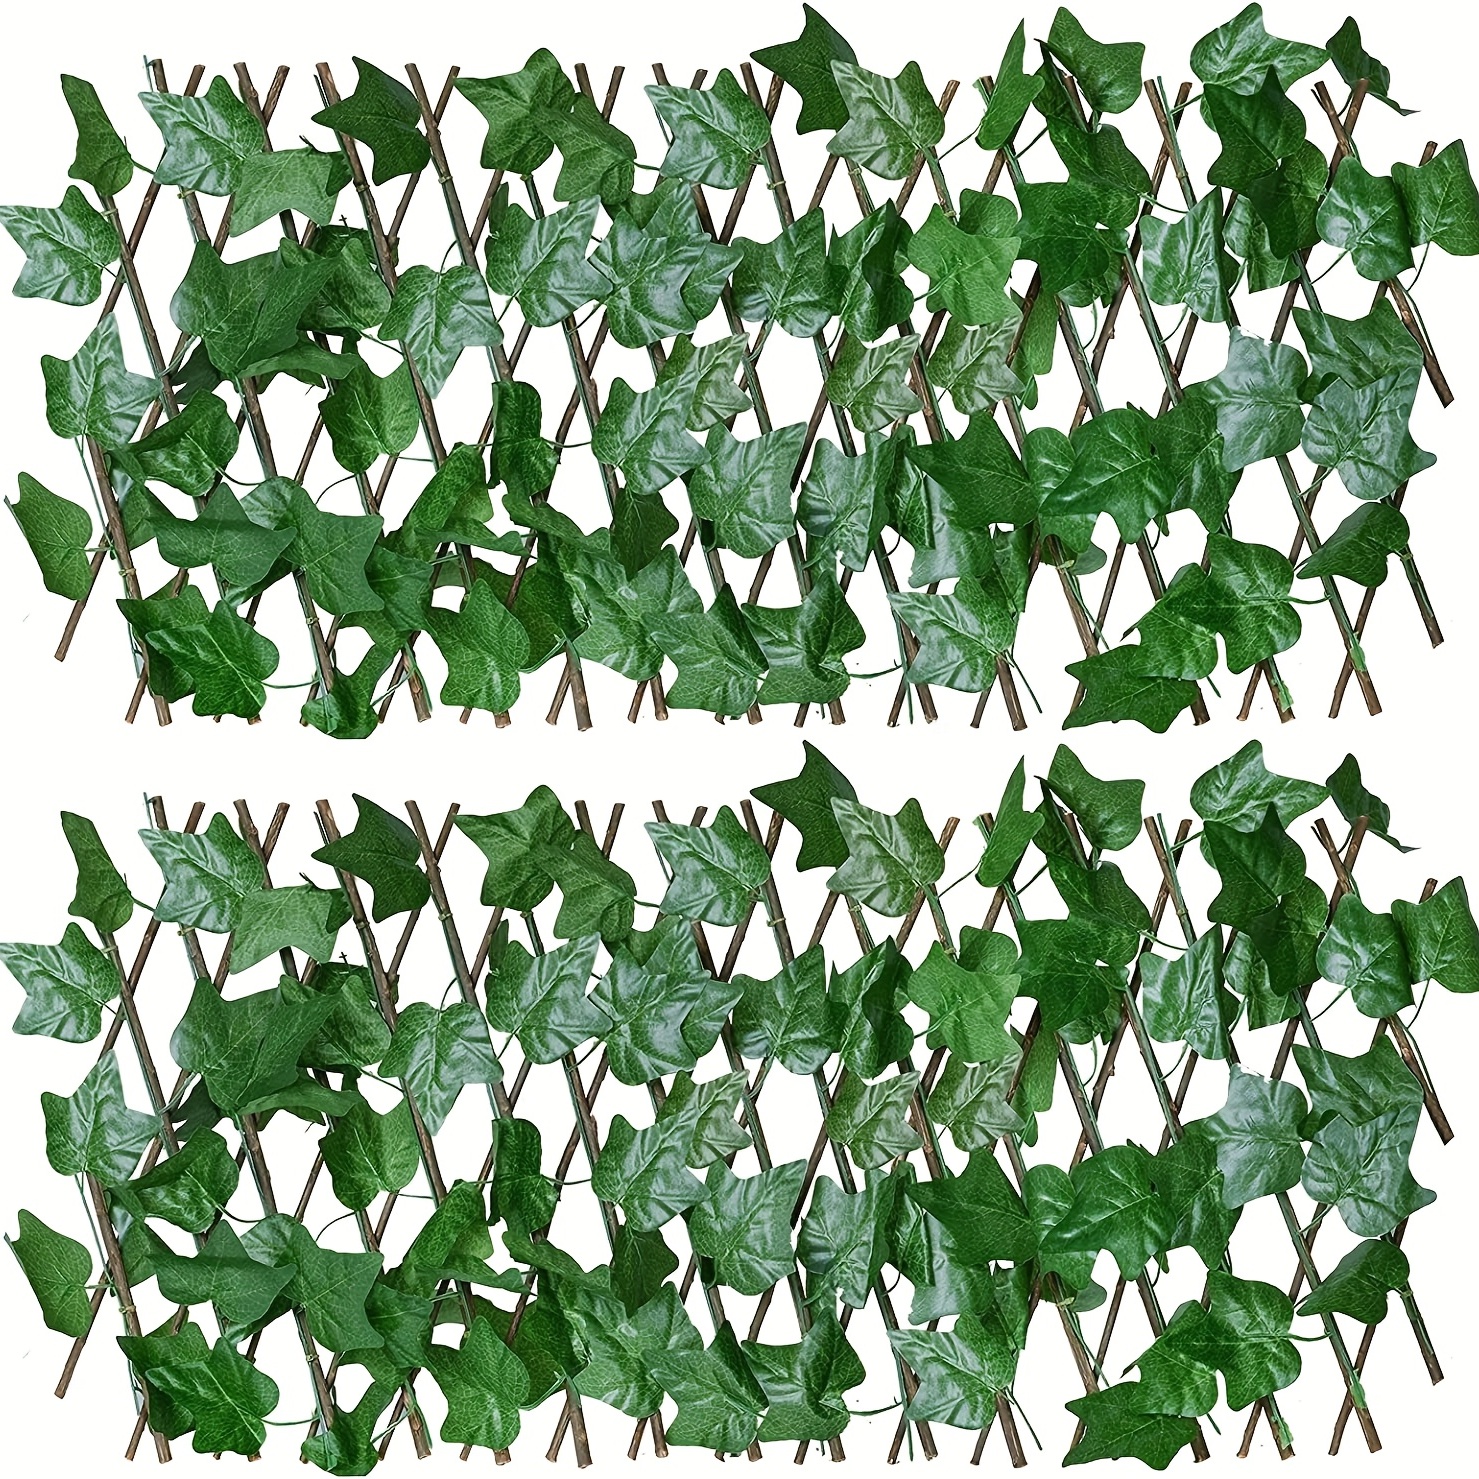 

2pcs Fence Privacy Screen, Artificial Leaf Faux Ivy Expandable/stretchable Privacy Fence Balcony Patio Outdoor, Decorative Faux Ivy Fencing Panel (single Sided Leaves)